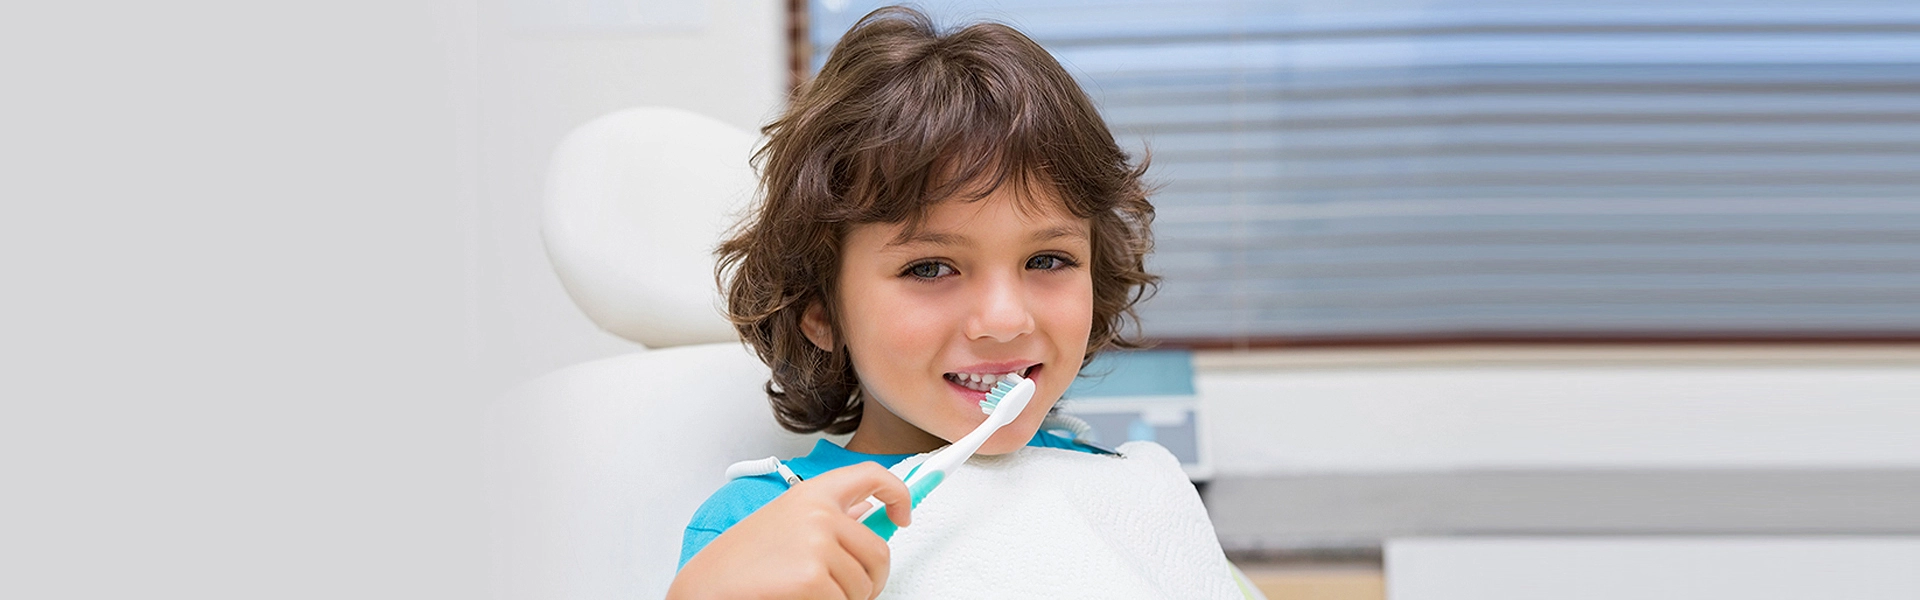 HOW TO PROTECT YOUR CHILD FROM GETTING A CRACKED TOOTH